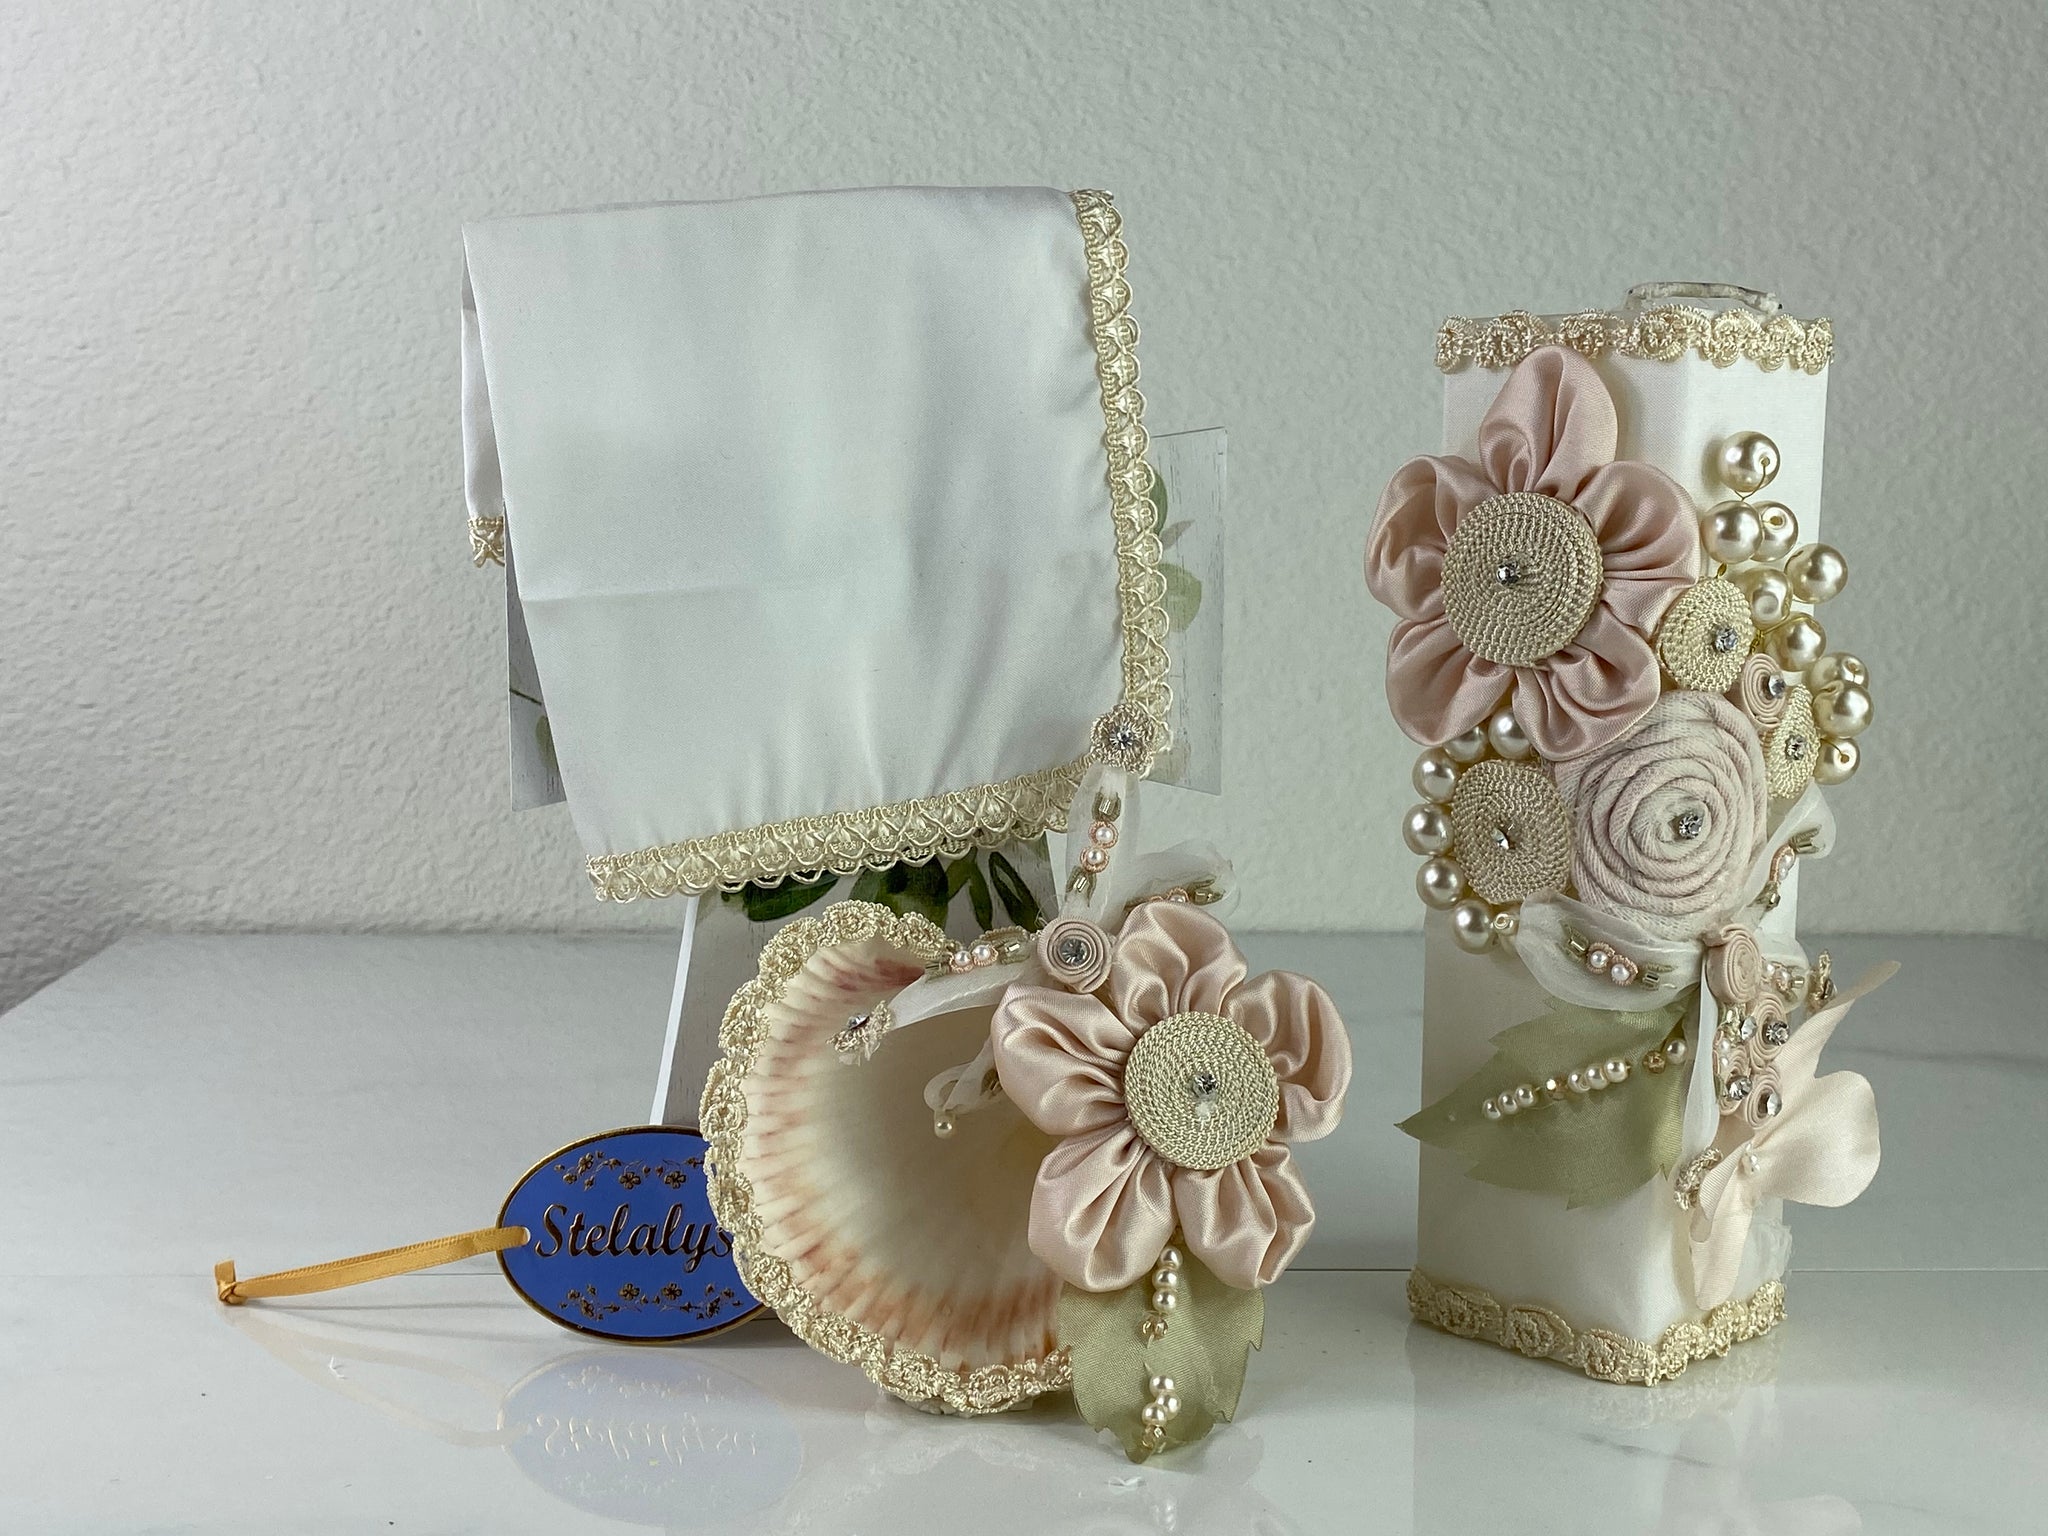 These one-of-a-kind Candle set is handmade and ivory in color.  This candle can also be use with a white baptism outfit because it has an array of light colors including white.   It is uniquely decorated with ribbon, pearls, crystals, flowers, and beads making it a gorgeous keepsake.   This candle is square in shape.    To match, the Shell is put together piece by piece to compliment the Candle and Handkerchief.  The Handkerchief is made of satin and embroidered lace 